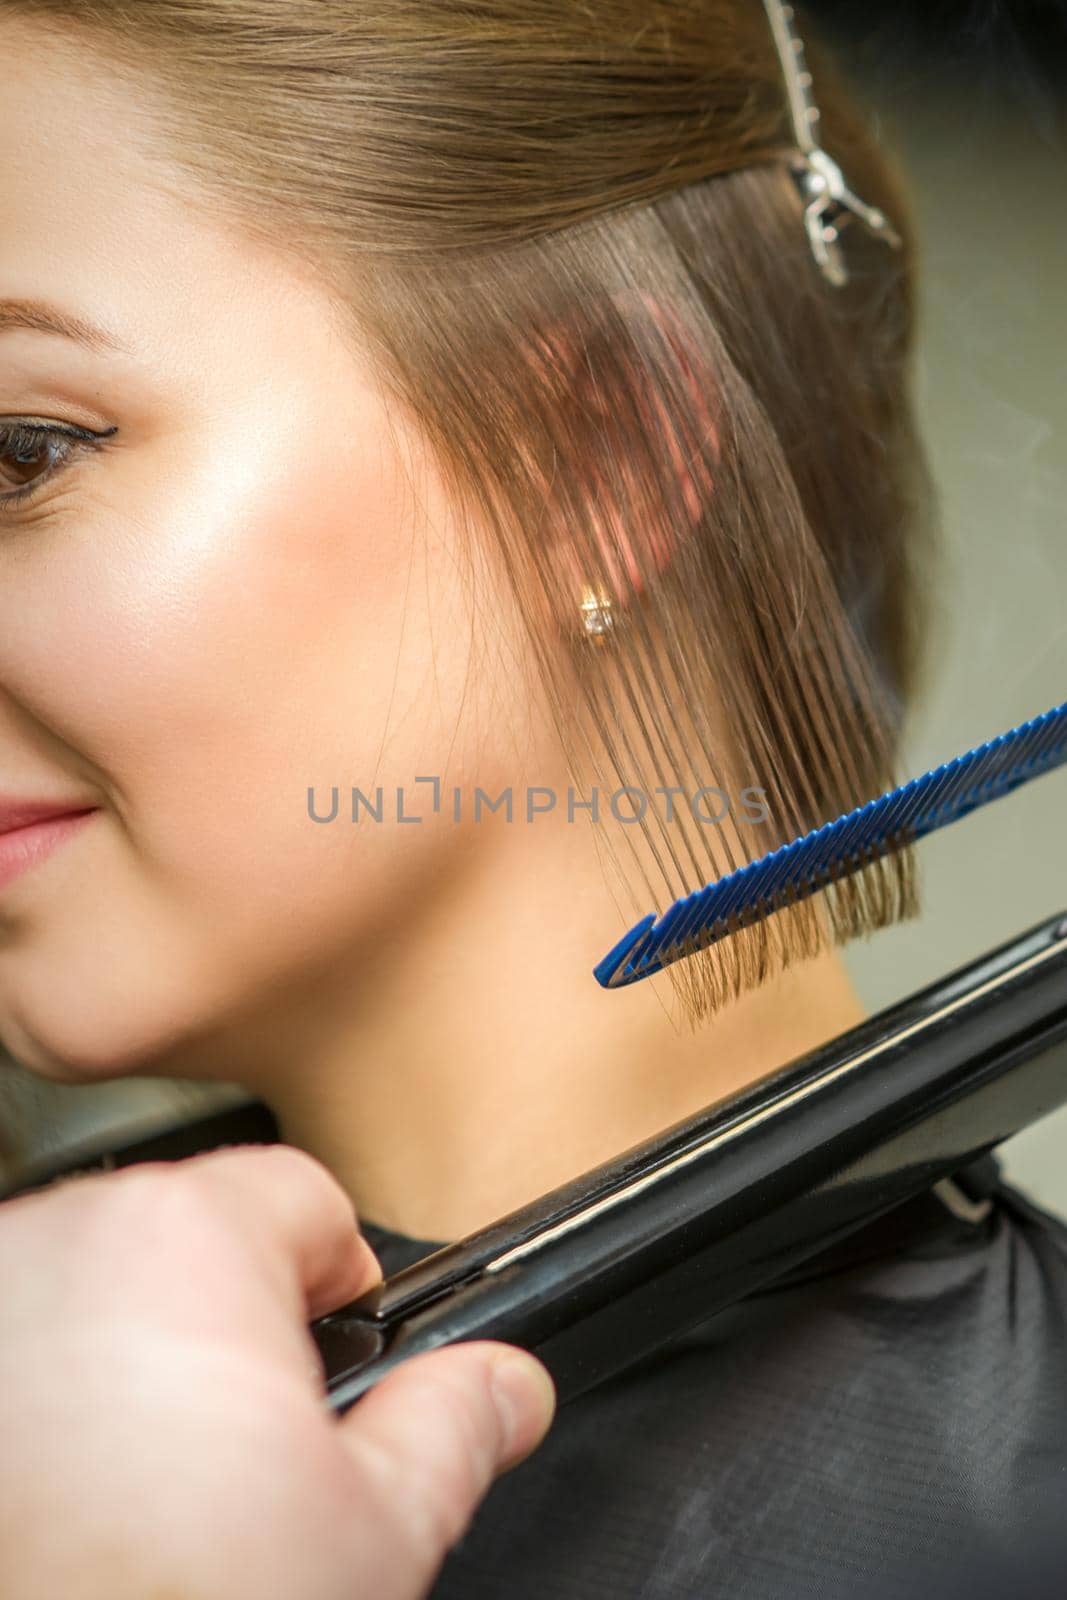 Hairstylist is straightening short hair of young brunette woman with a flat iron in a hairdresser salon, close up